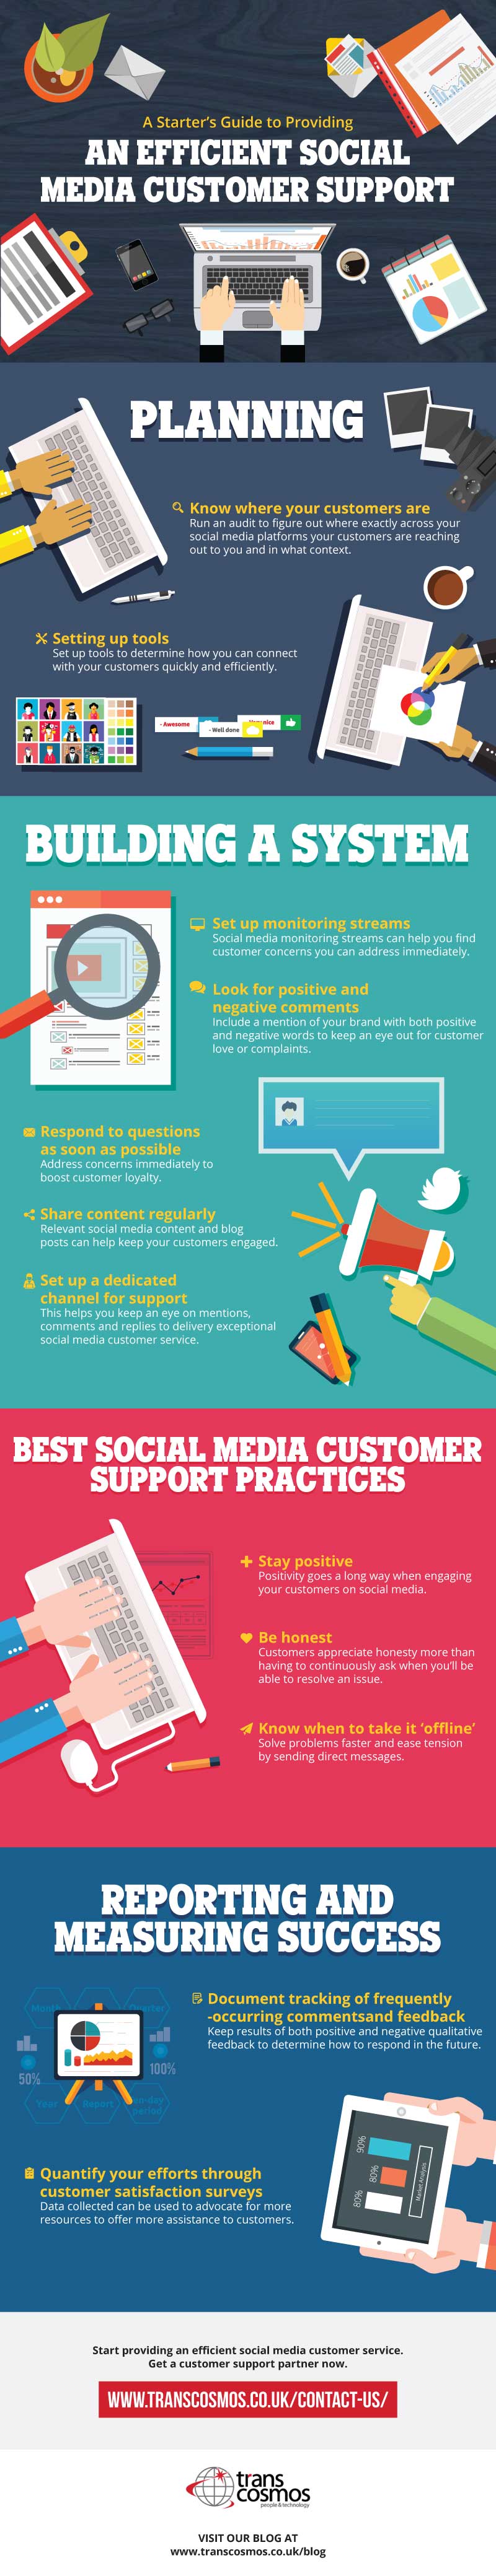 A Starter’s Guide to Providing an Efficient Social Media Customer Support